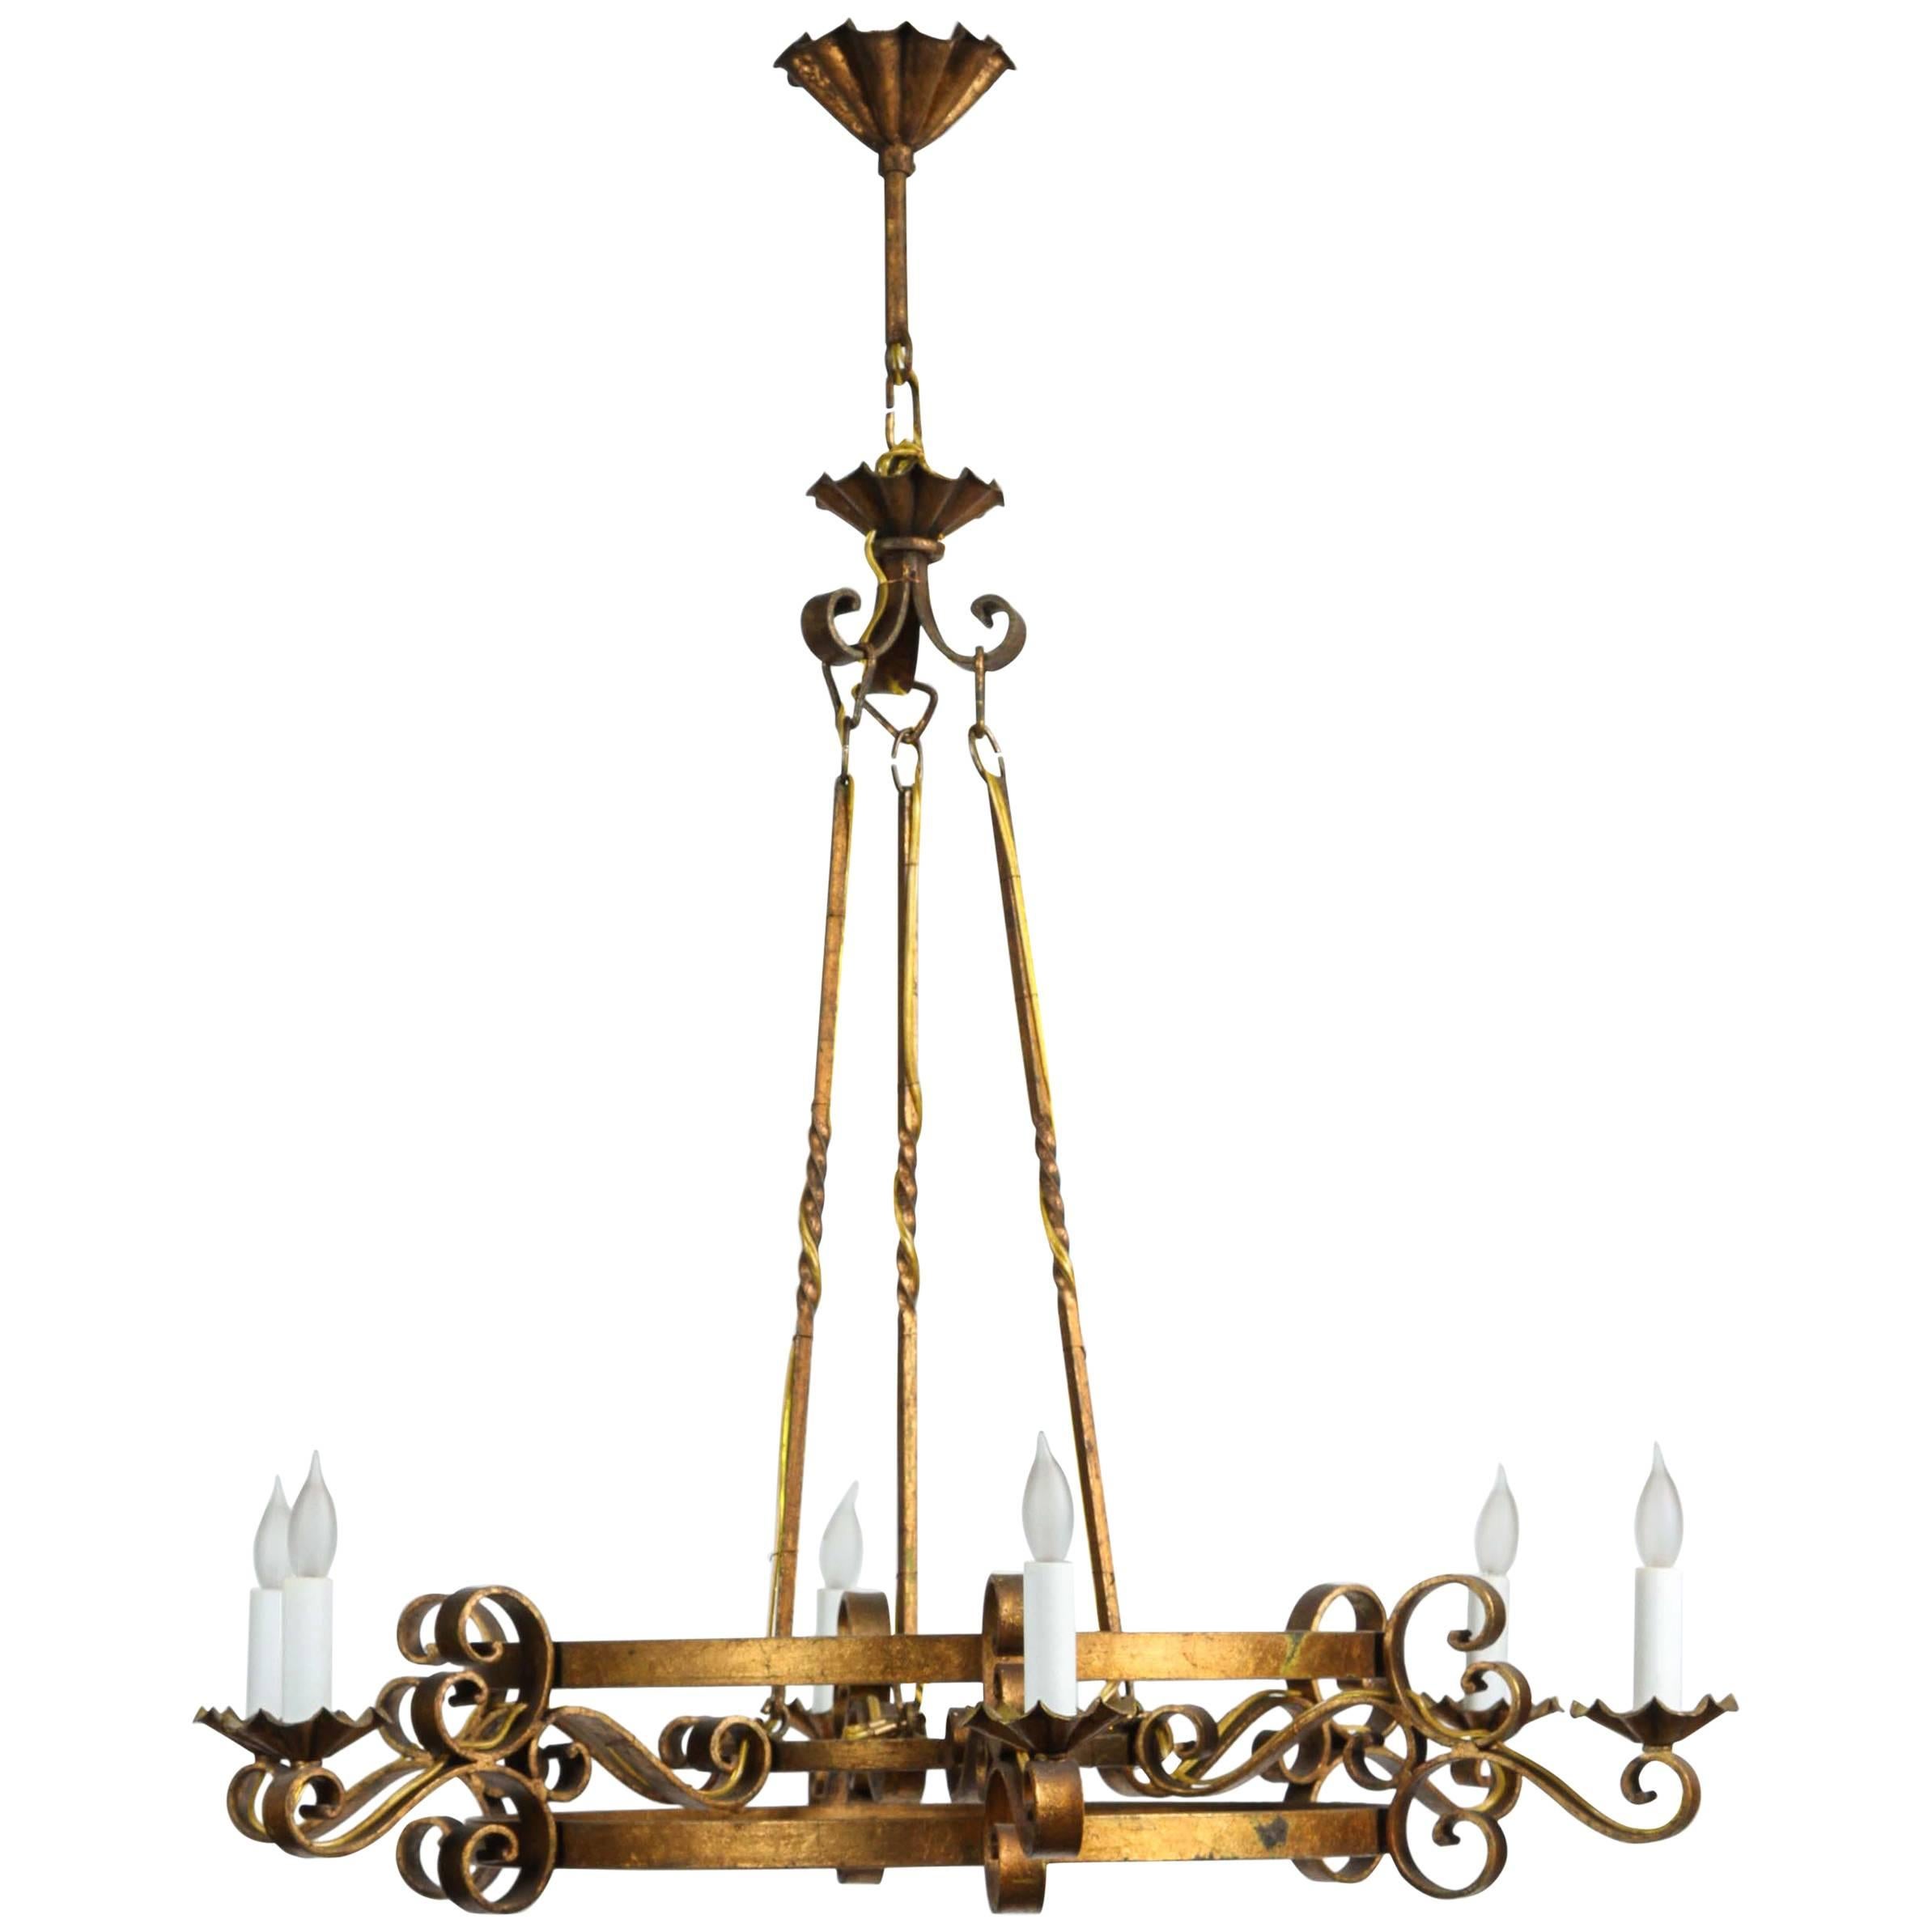 1970s Six-Light French Gold Finish Wrought Iron Chandelier